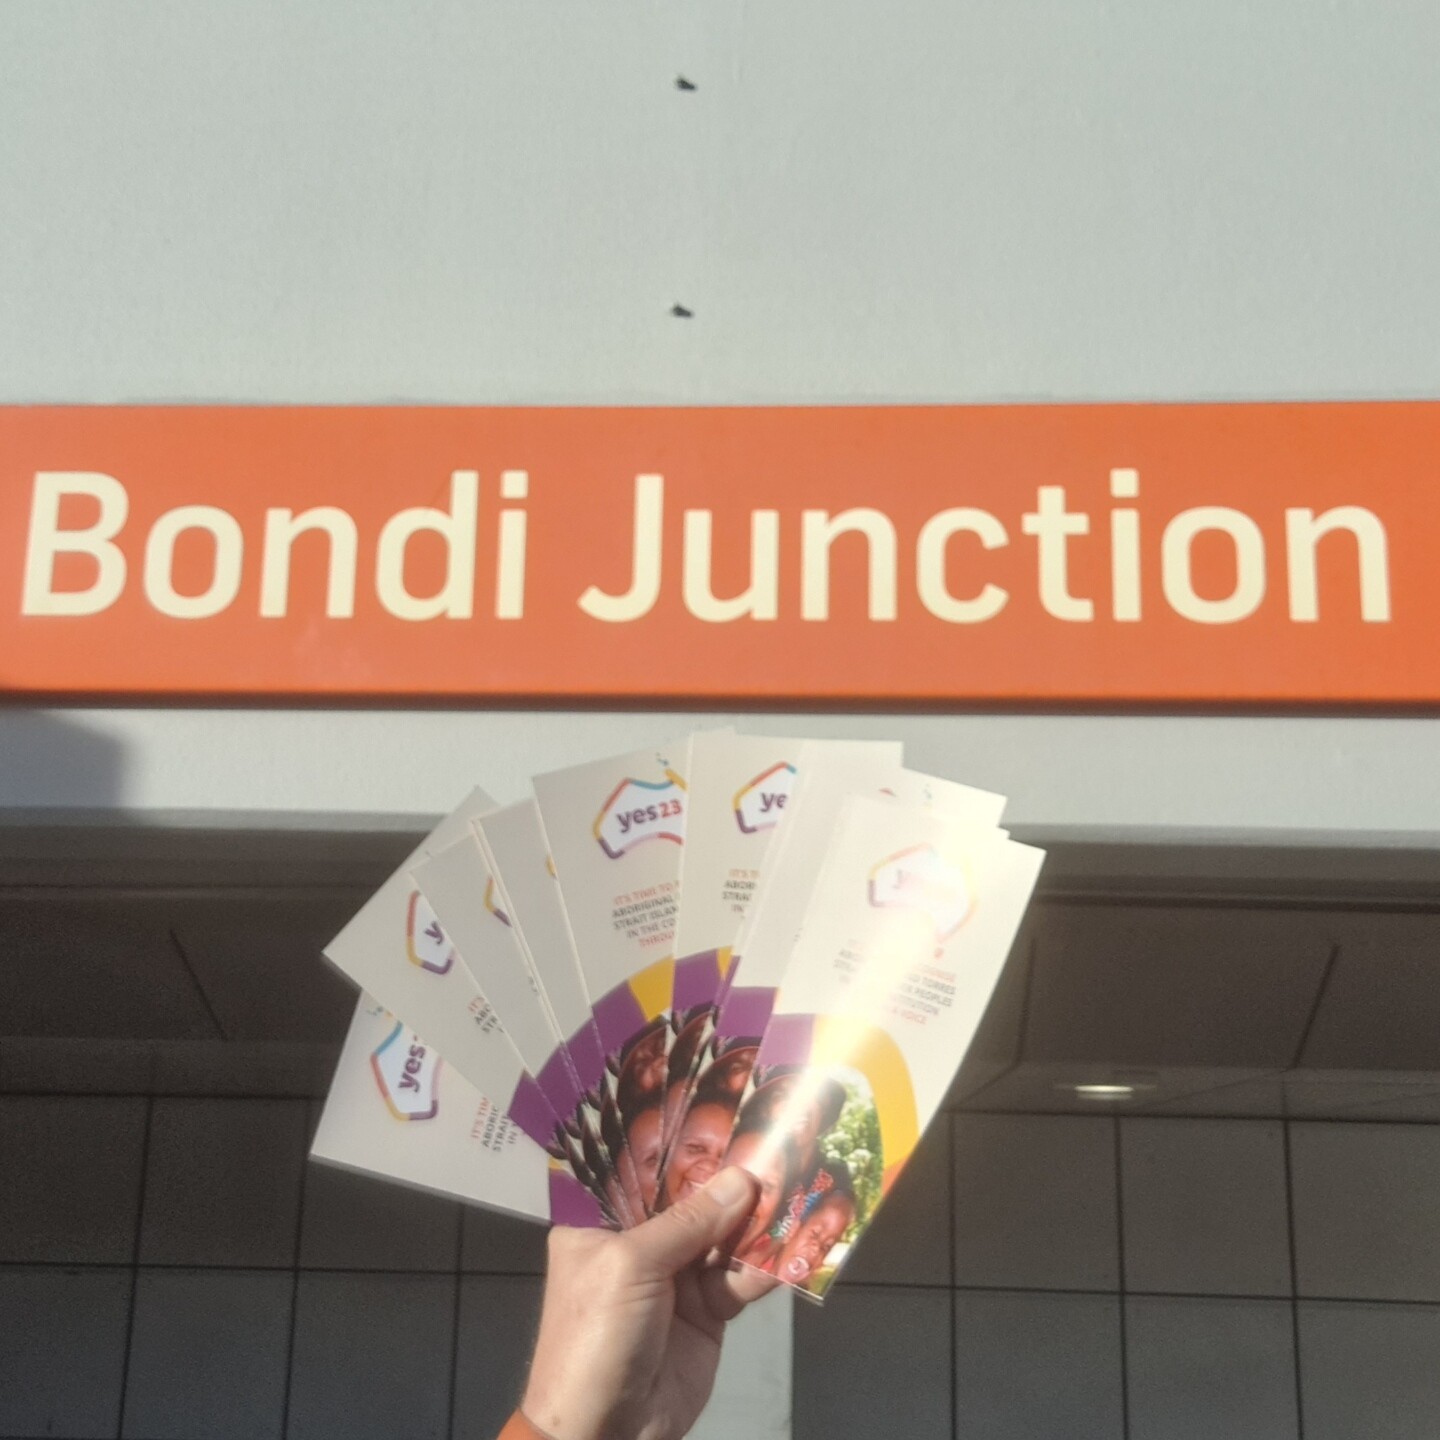 My hand holding Yes23 flyers in front of the Bondi Junction train station sign.